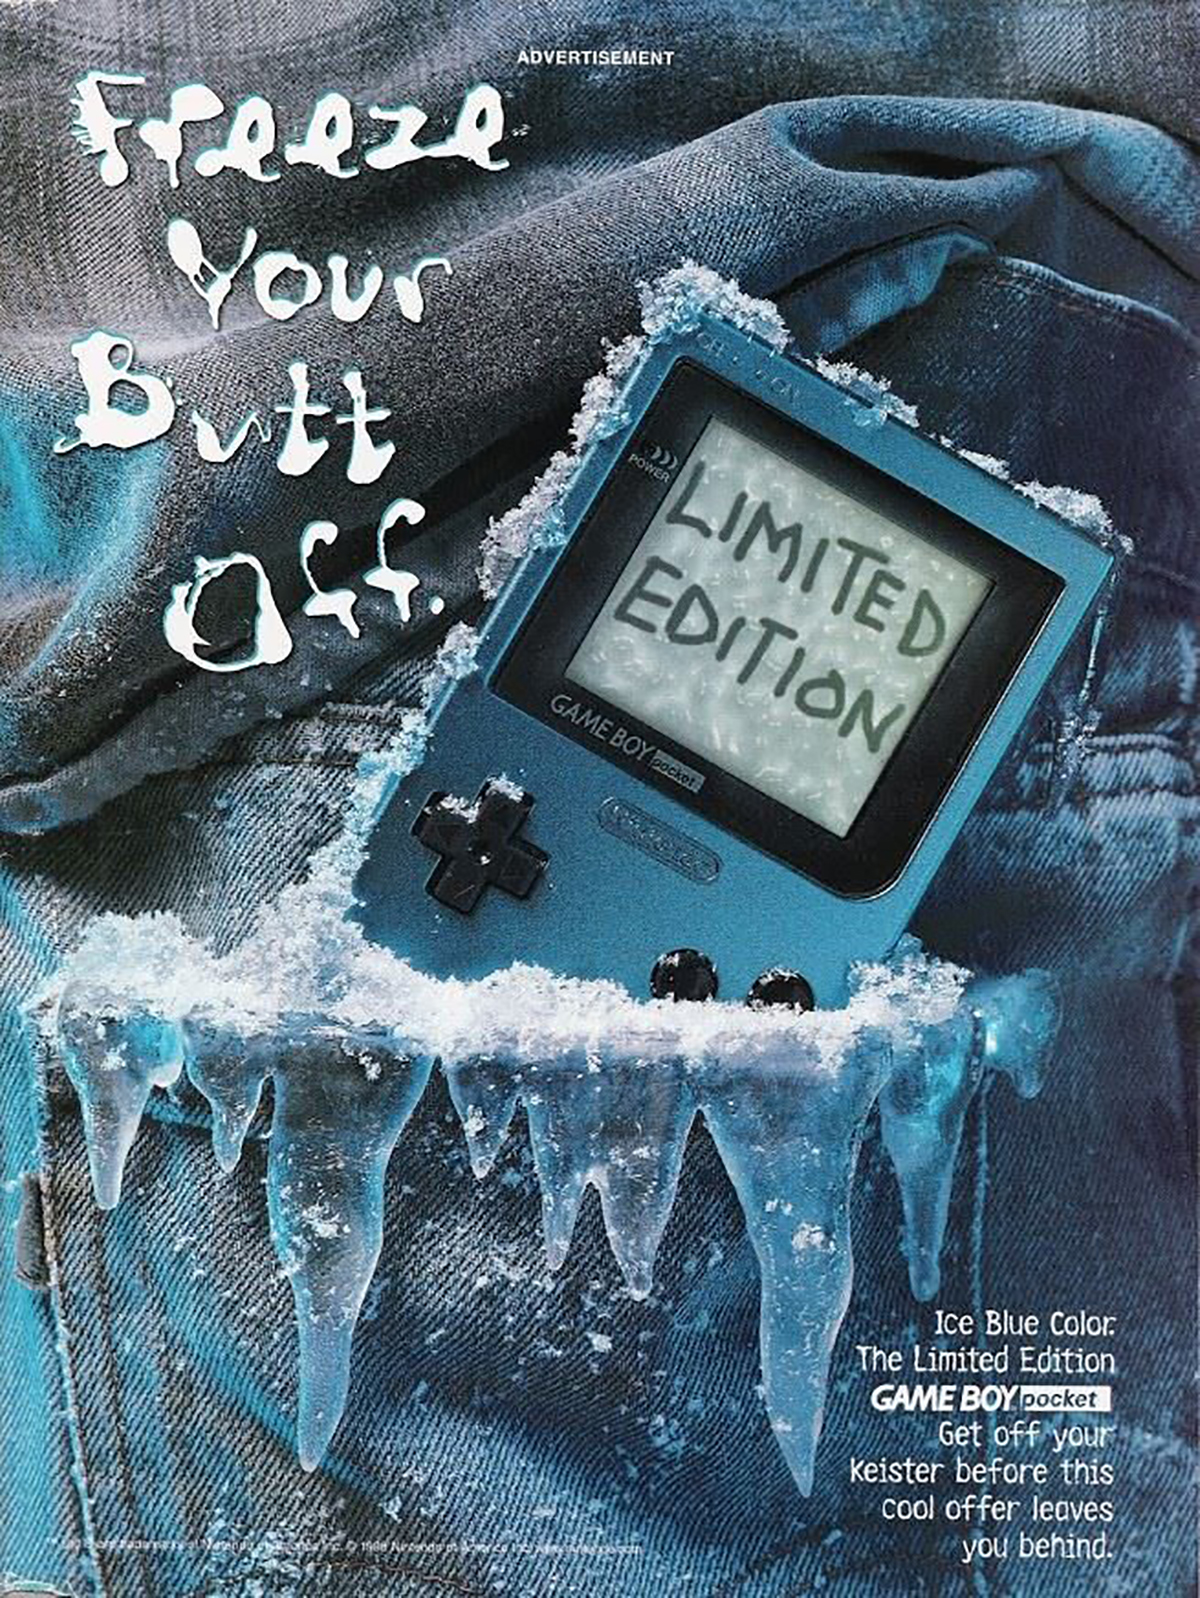 90's gameboy ads - Freeze Your Butt Oft. aff Advertisement Game Boy Limited Edition Gran Ice Blue Color The Limited Edition Game Boy pocket Get off your keister before this cool offer leaves you behind